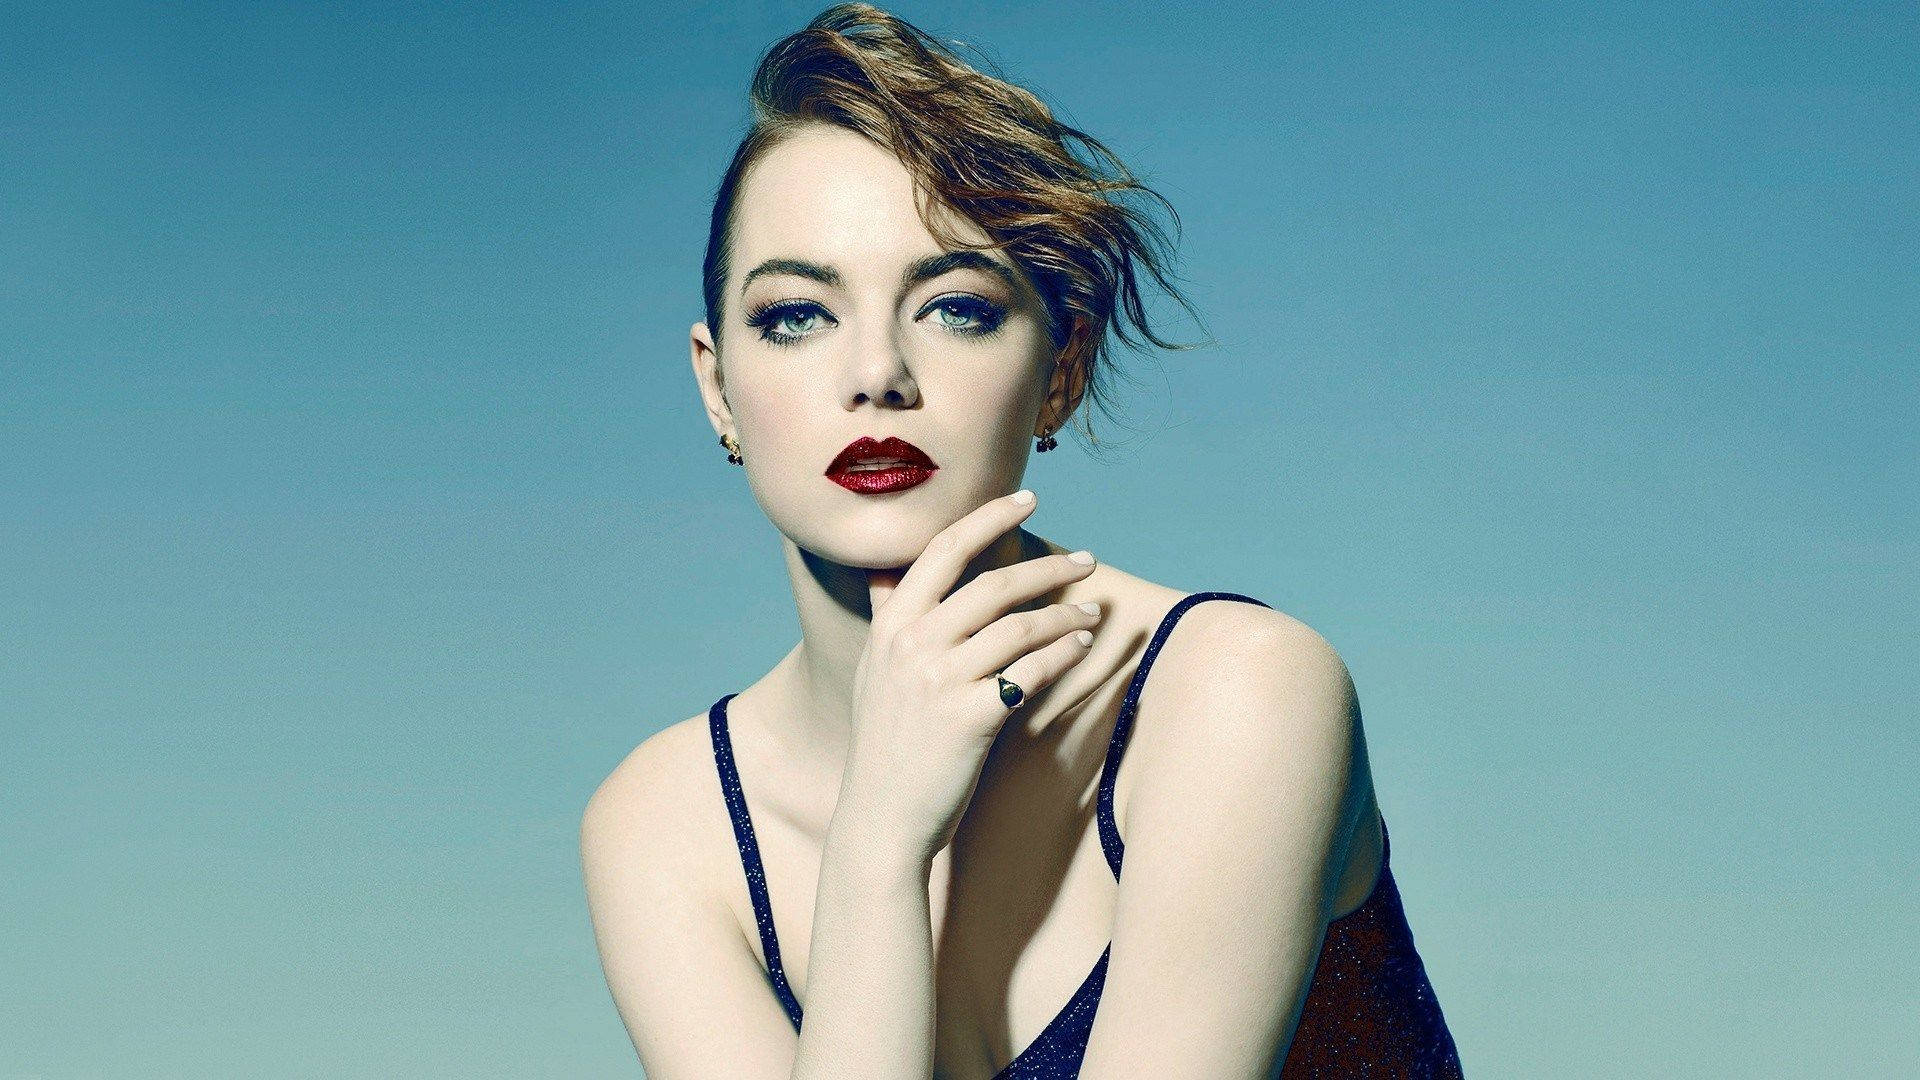 Emma Stone radiating confidence and glamour Wallpaper